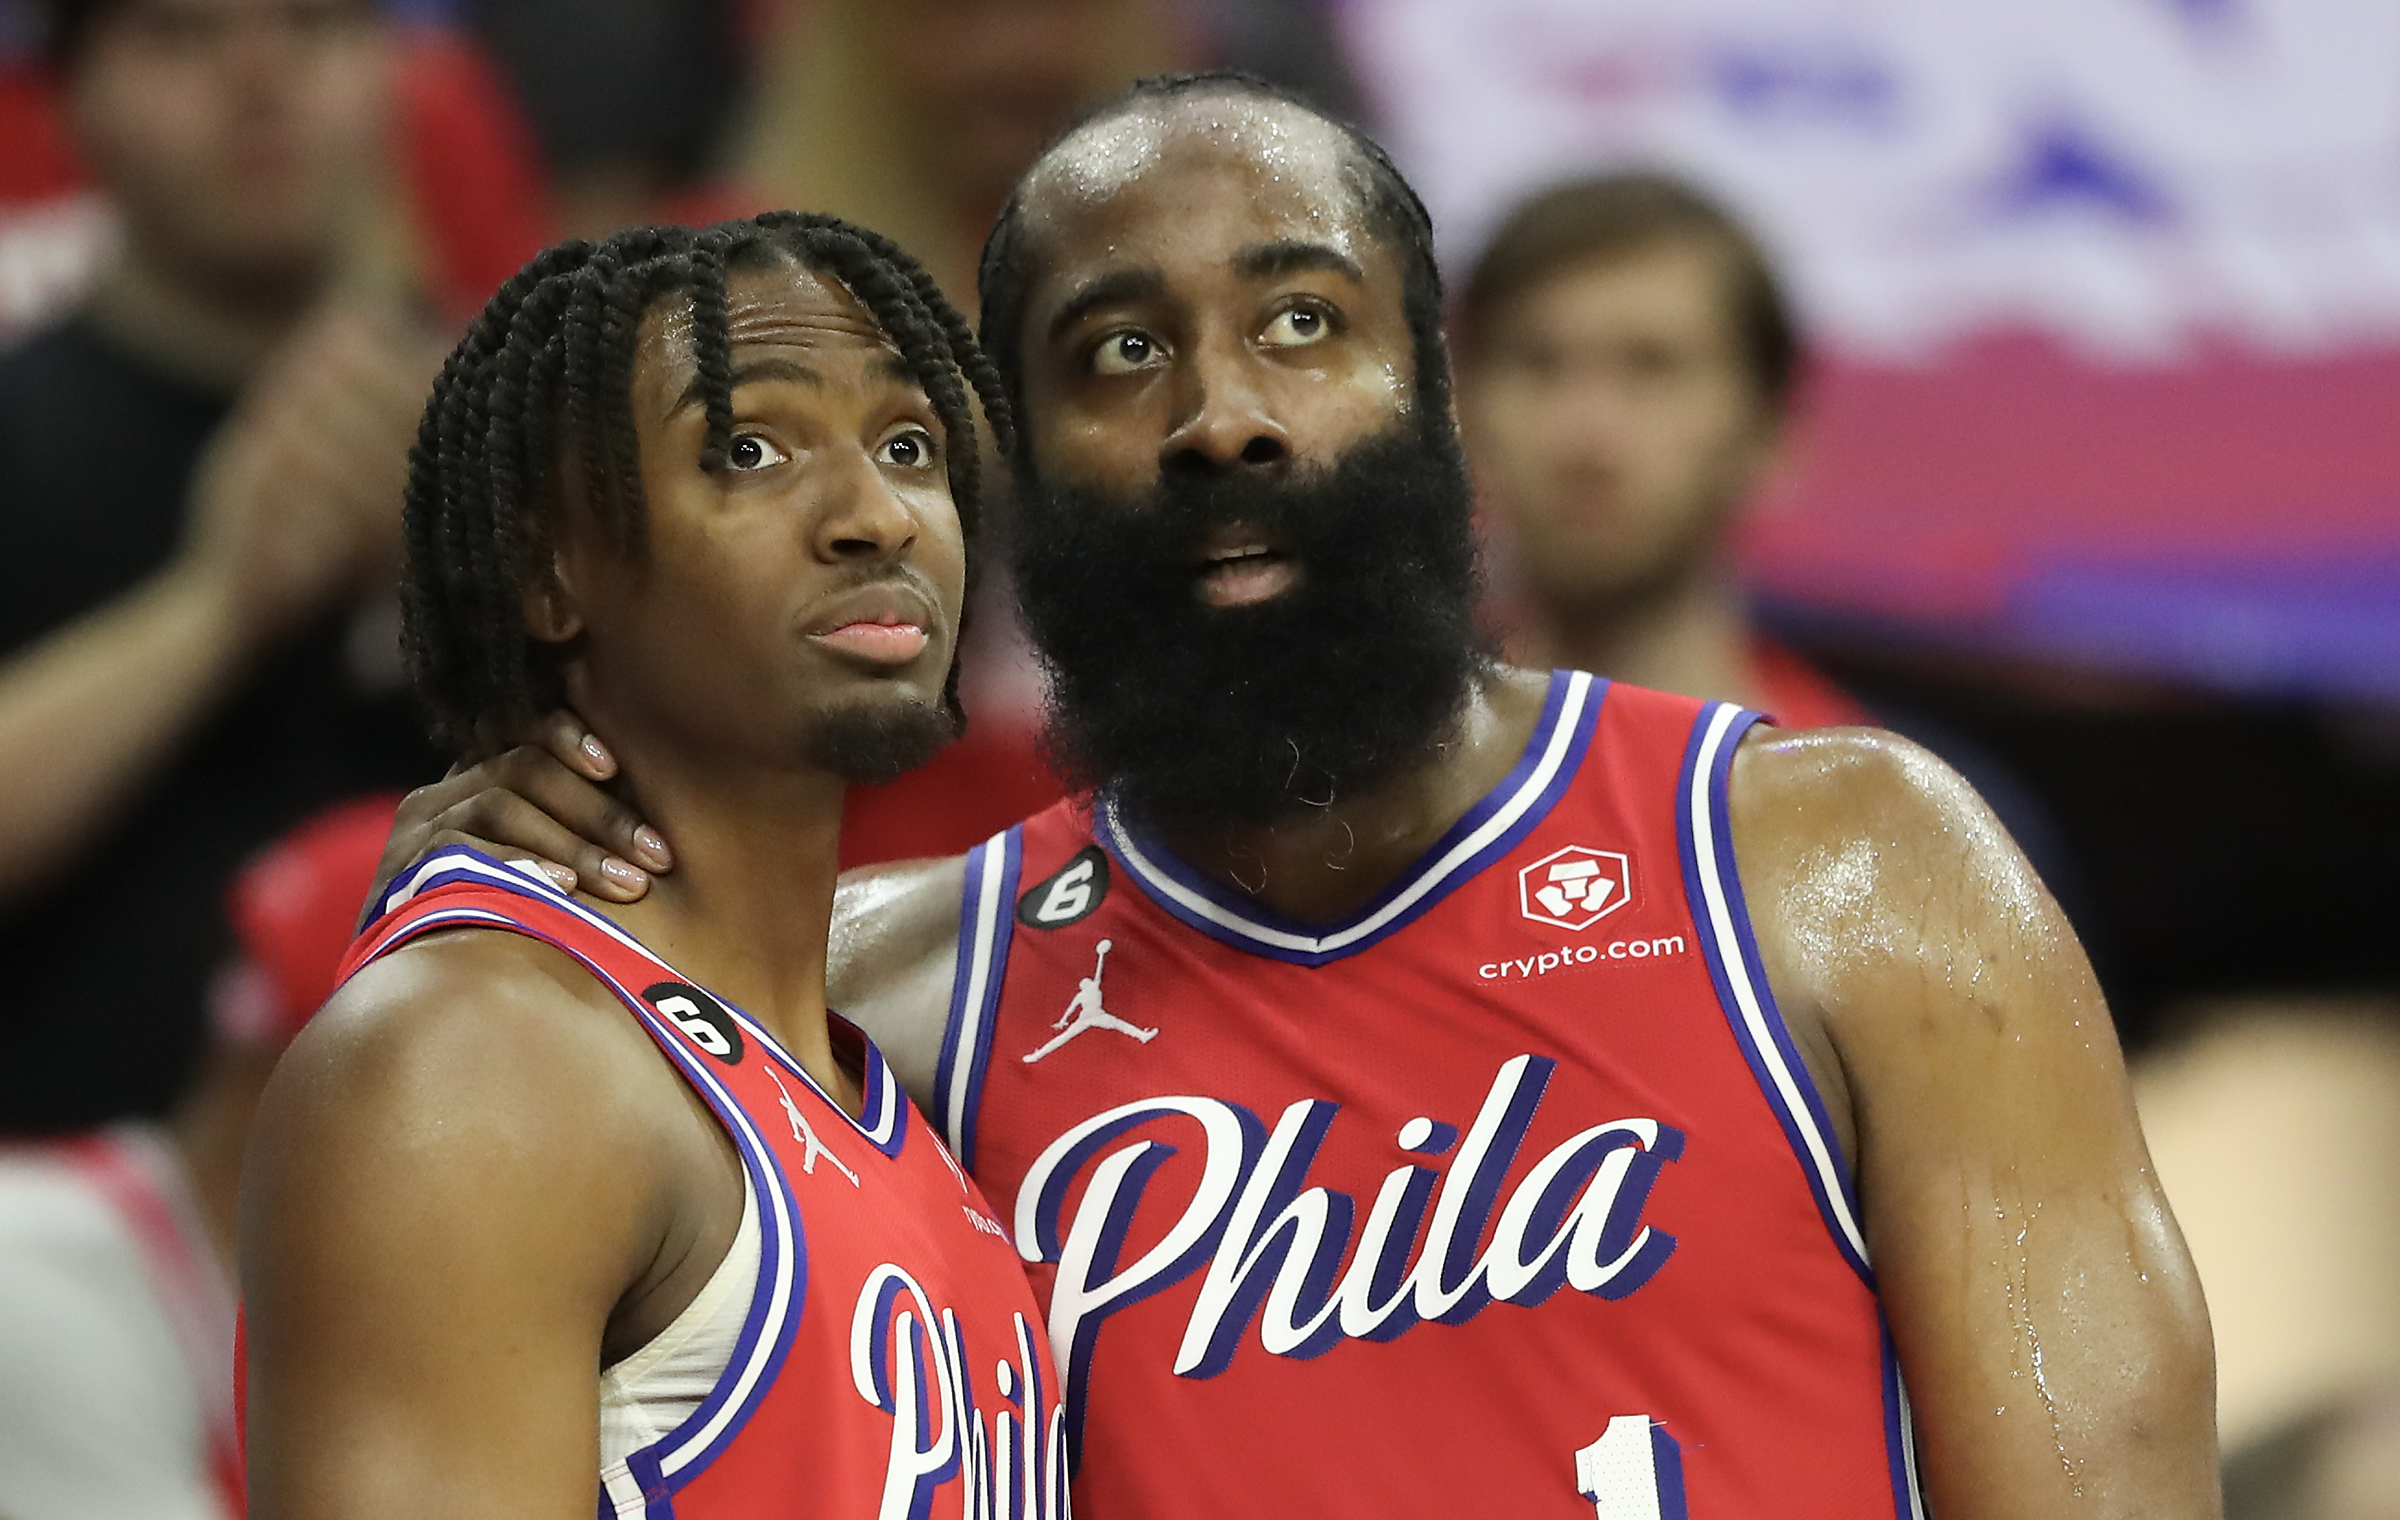 NBA Playoffs: Maxey takes the spotlight in the 76ers Game 1 win vs Raptors